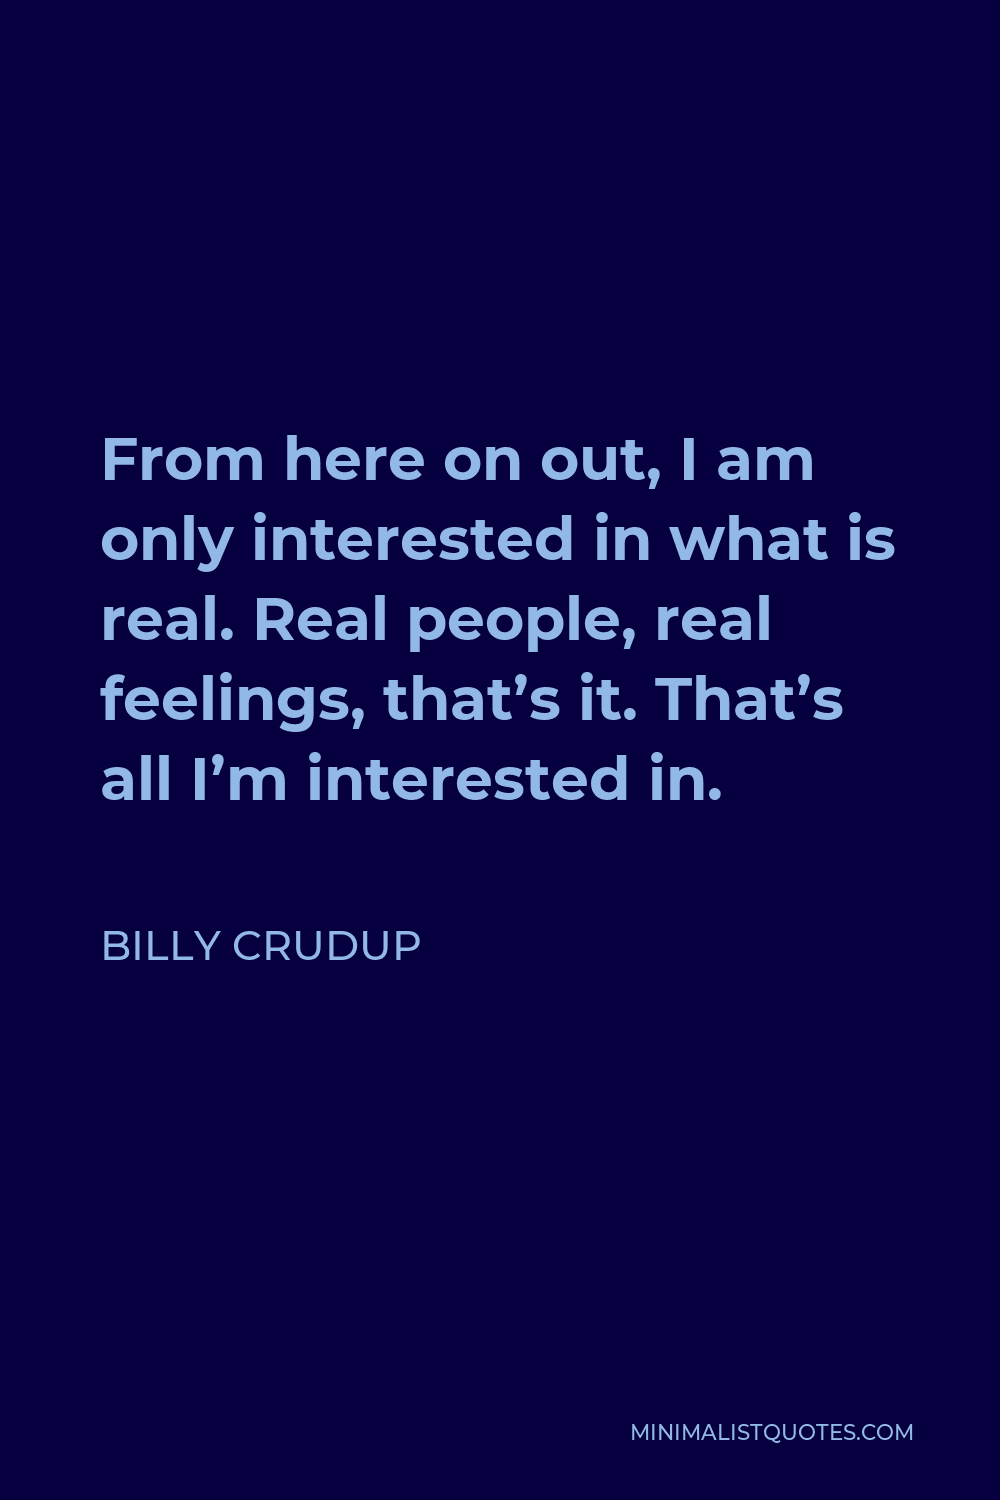 Billy Crudup Quote - From here on out, I am only interested in what is real. Real people, real feelings, that’s it. That’s all I’m interested in.